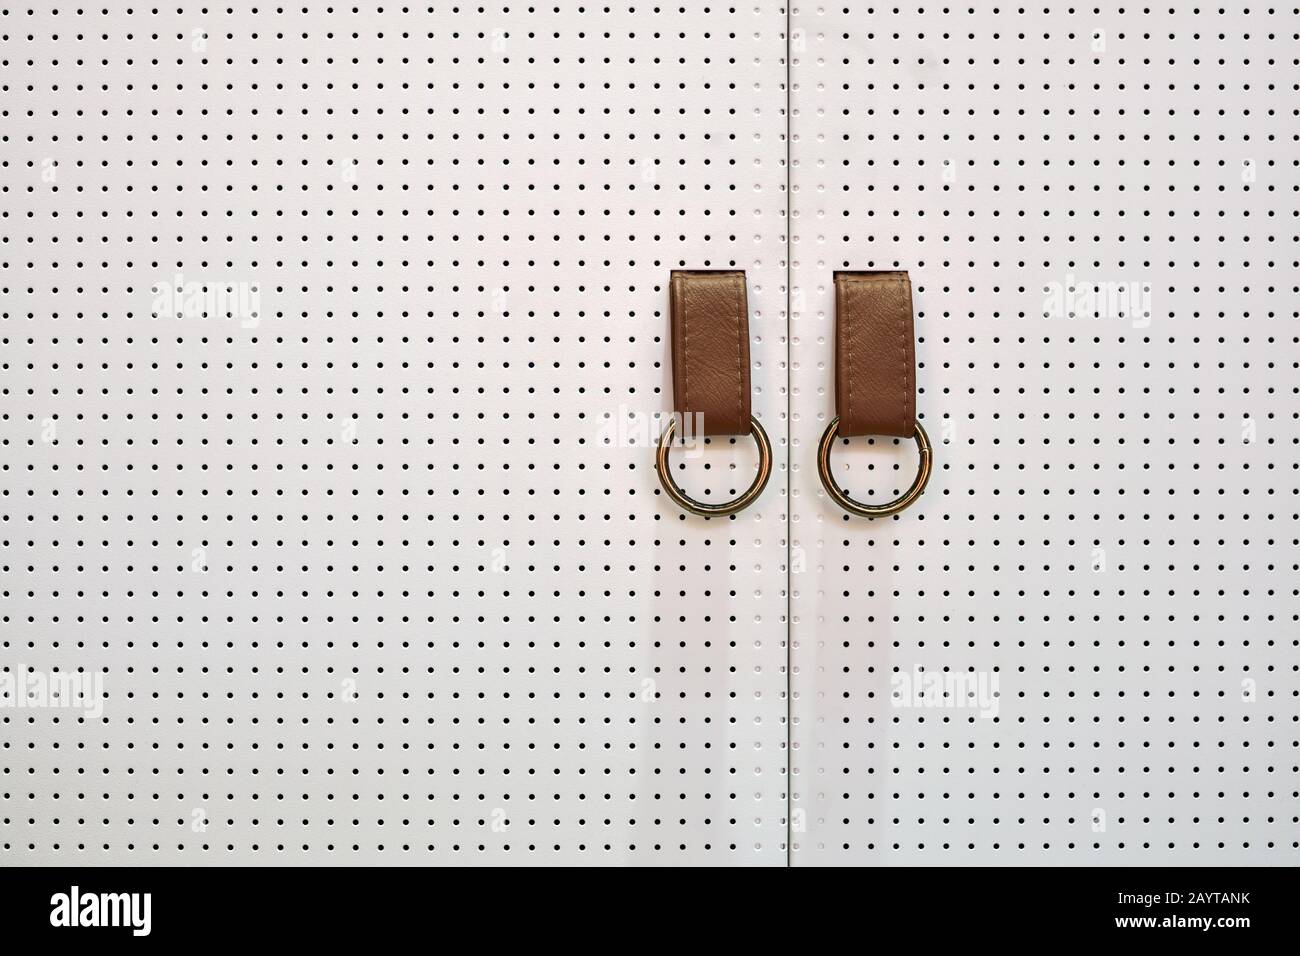 Closeup view at mesh doors with leather handles Stock Photo